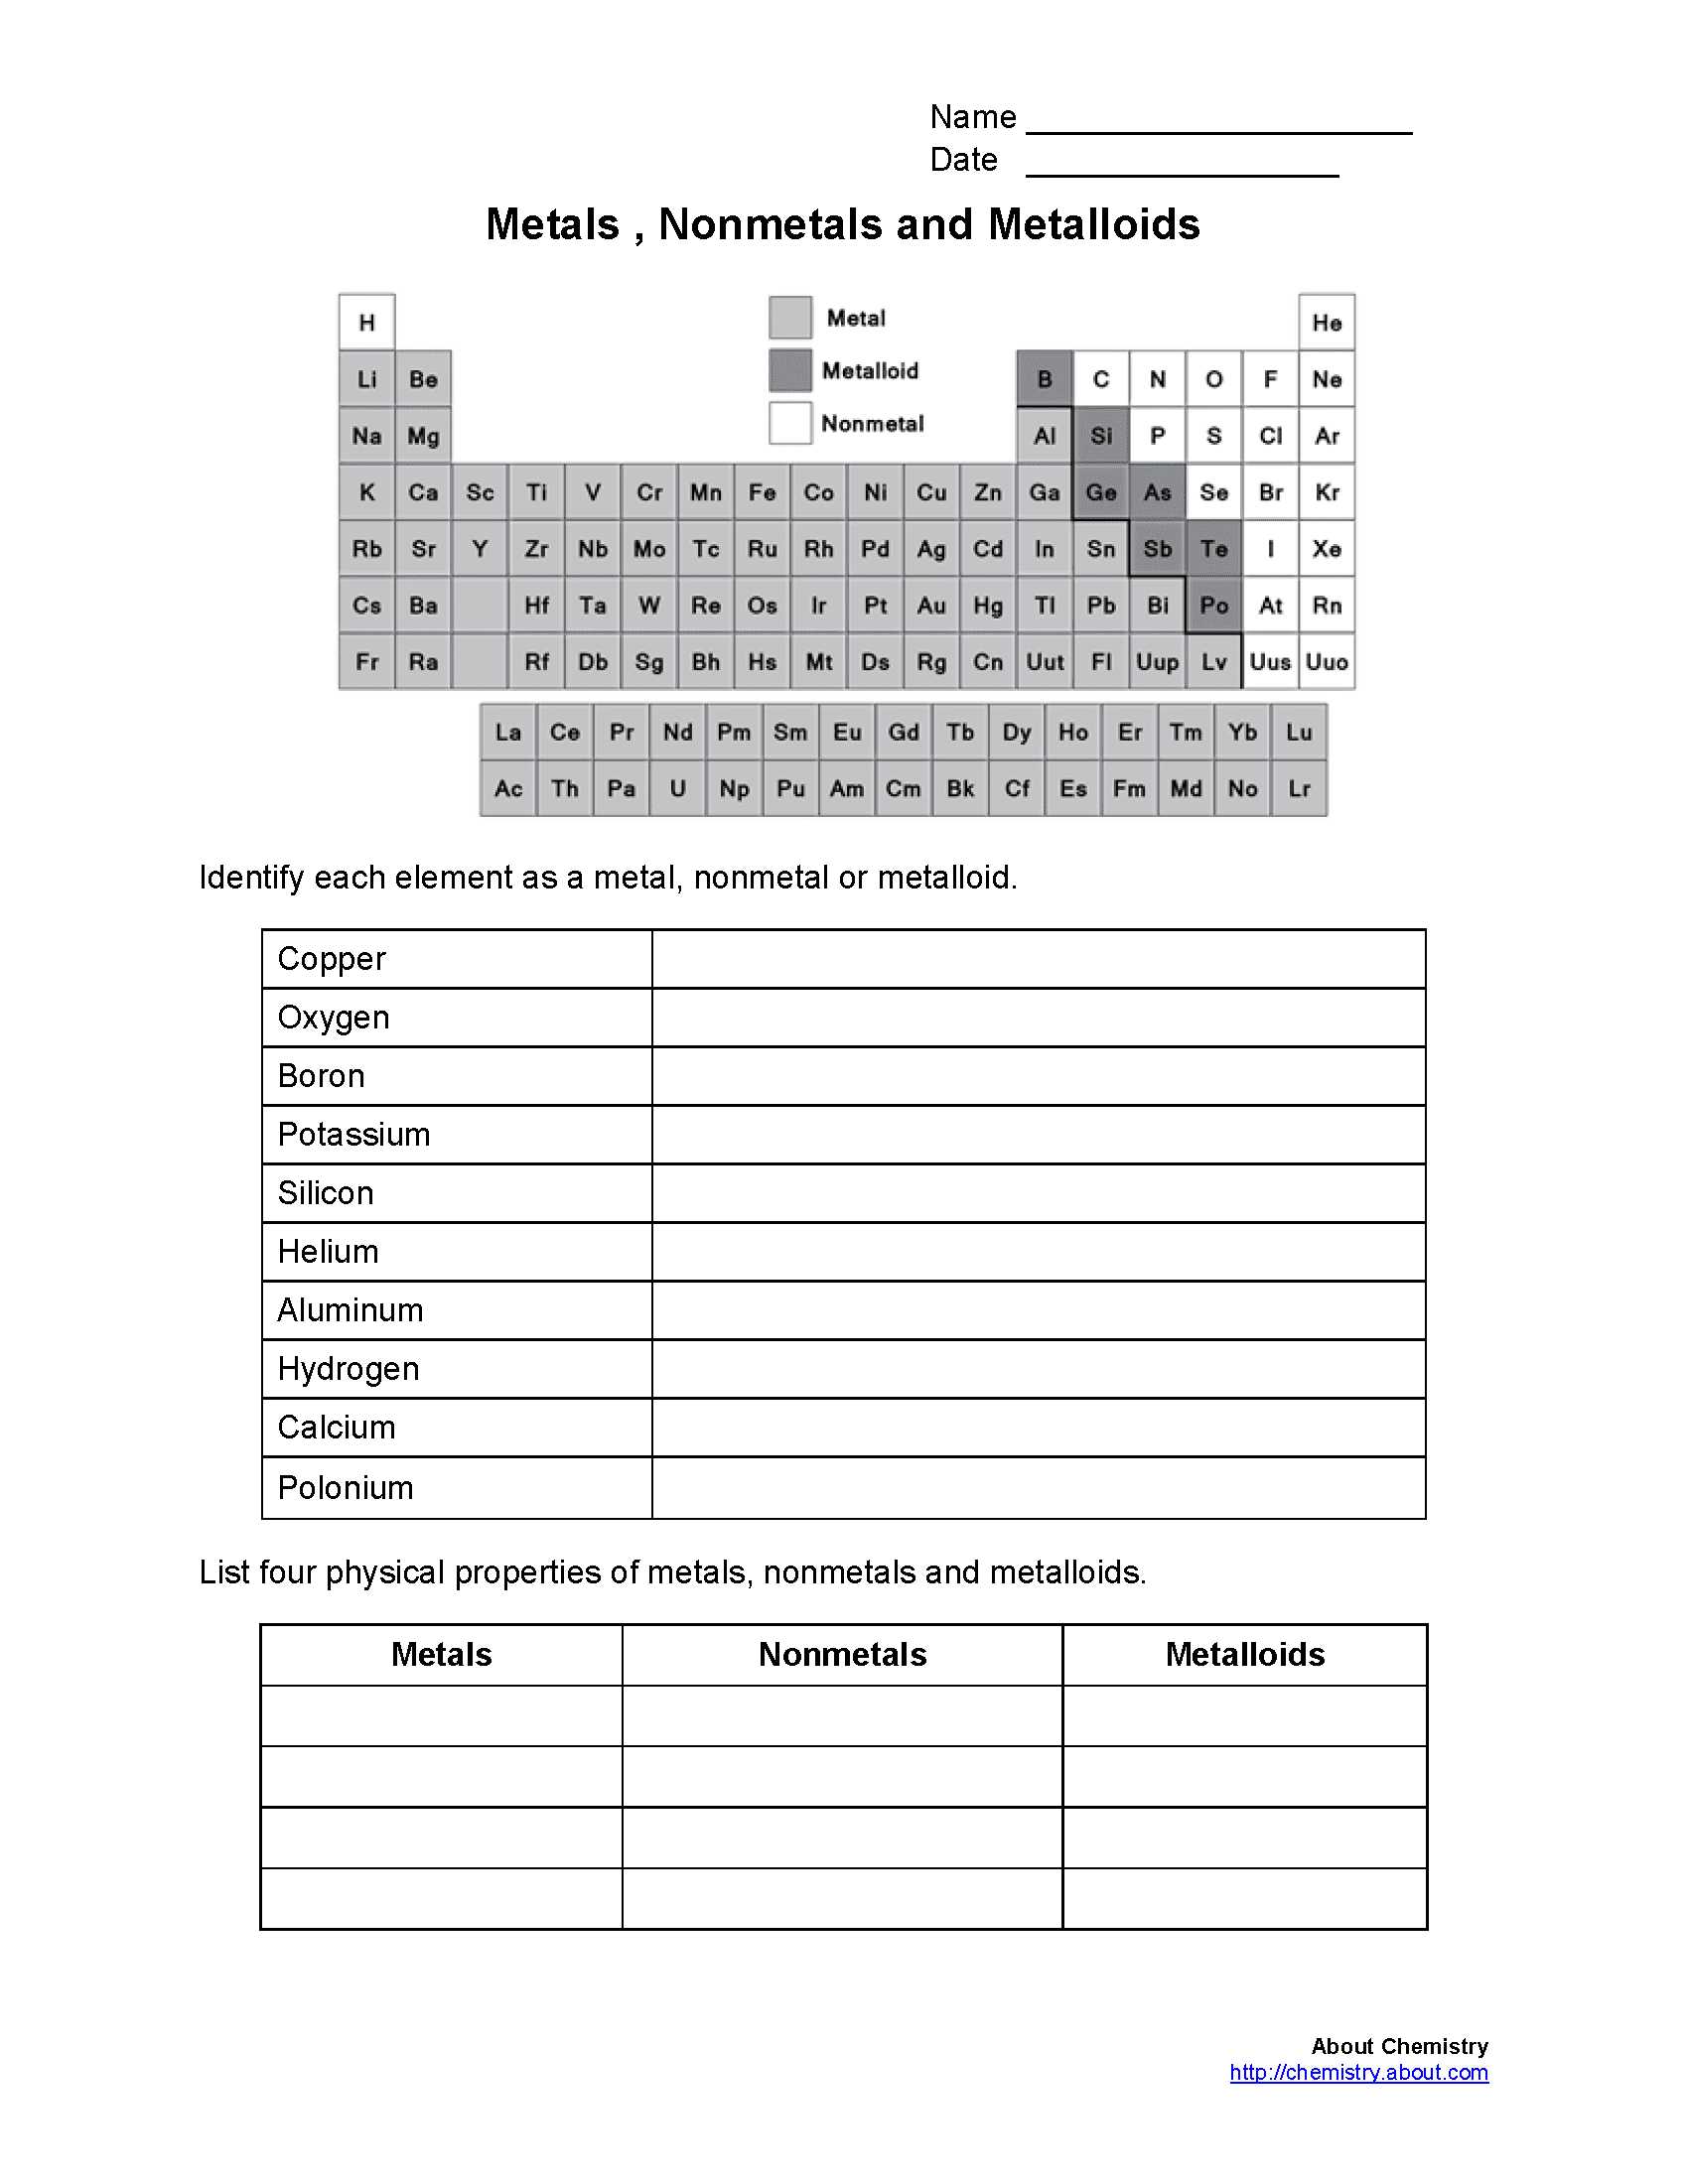 Weather and Climate Worksheets Pdf together with Metals Nonmetals Metalloids Worksheet